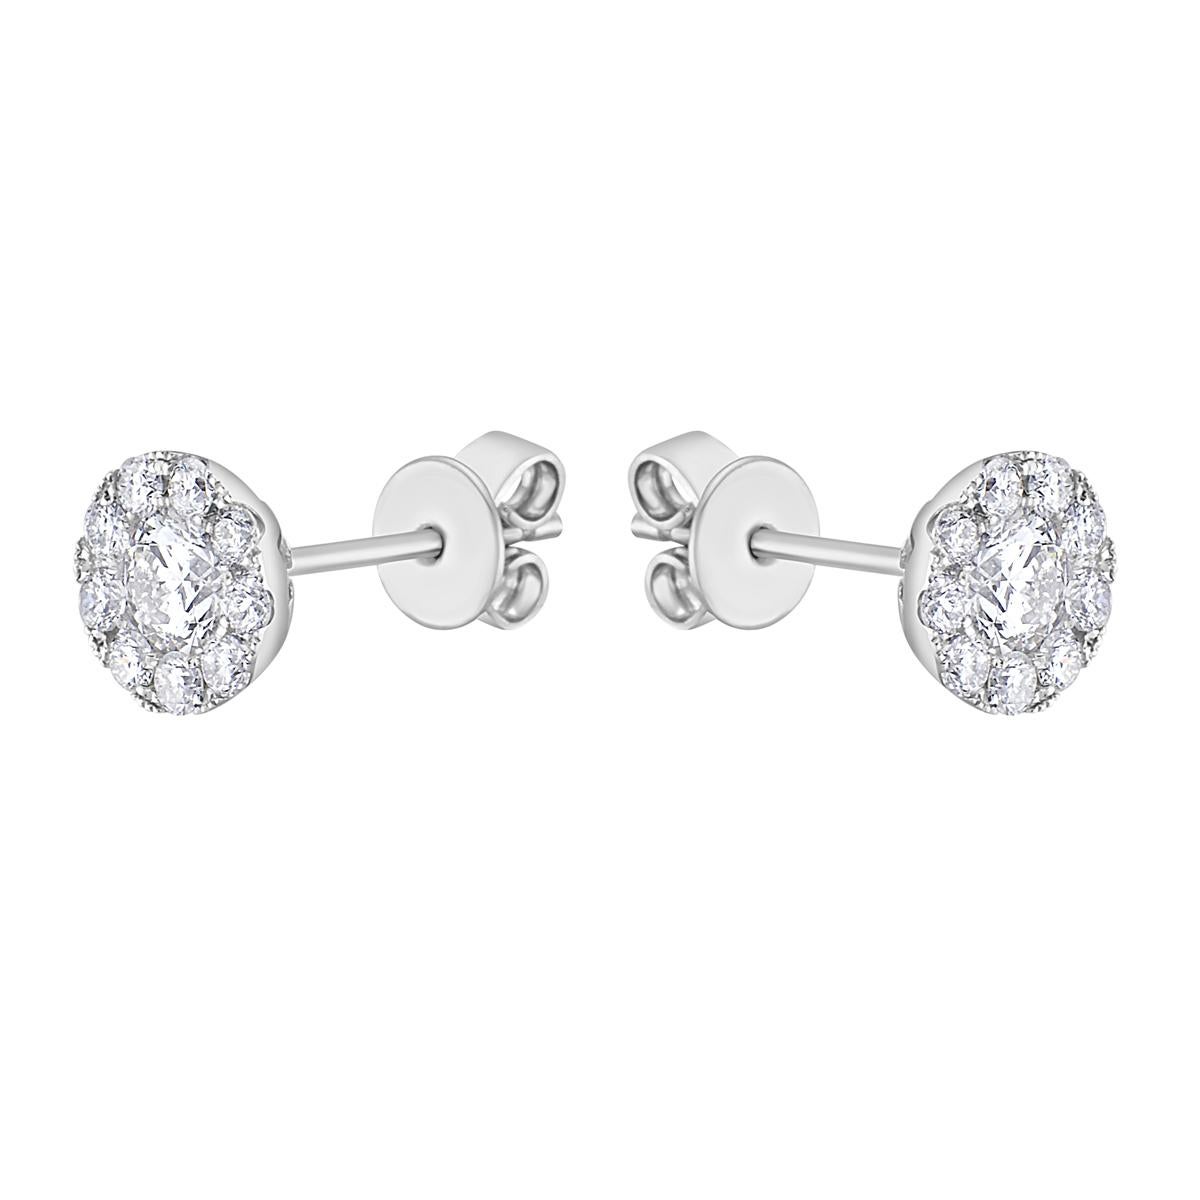 With these exquisite diamond studs, style and glamour are in the spotlight. These studs are set in 14-karat gold, made out of 1.0 grams of gold. The color of the diamonds is SI. The clarity is VS2-SI1. It is made out of 2 diamonds totaling 0.44